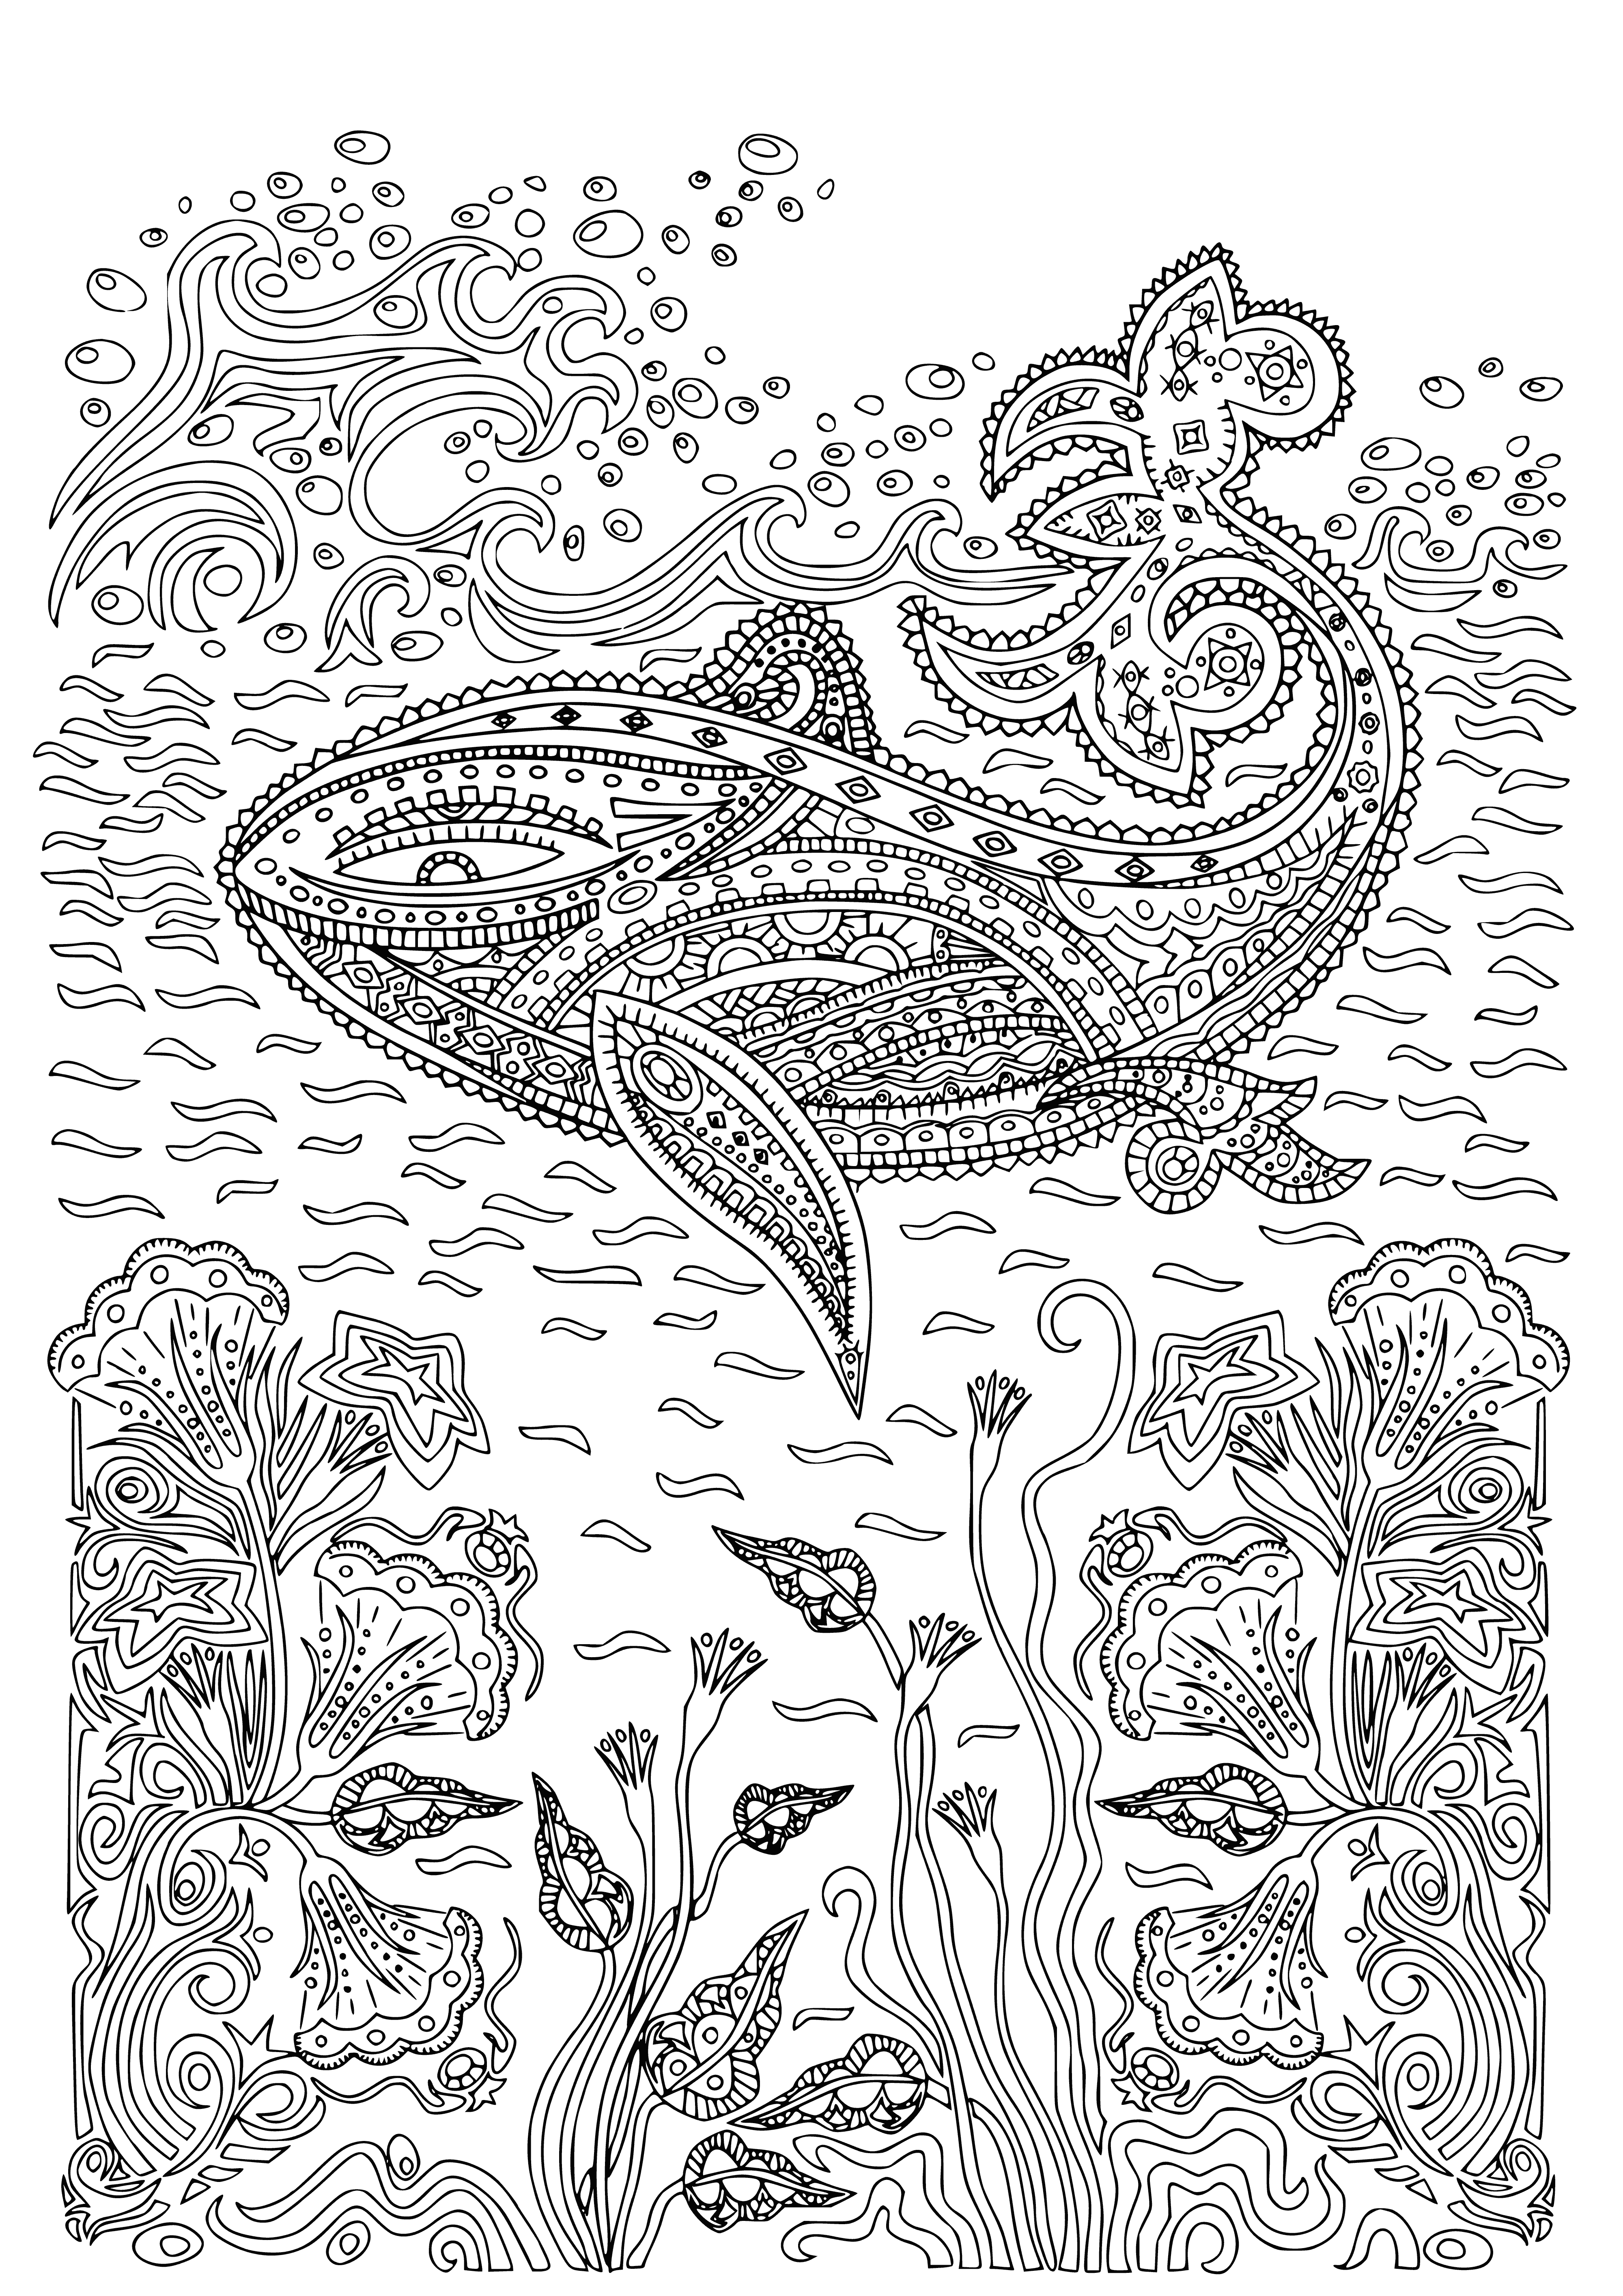 coloring page: Sea-Kit: Adult coloring book w/pages of various designs & colors; perfect for relaxation and creative expression.